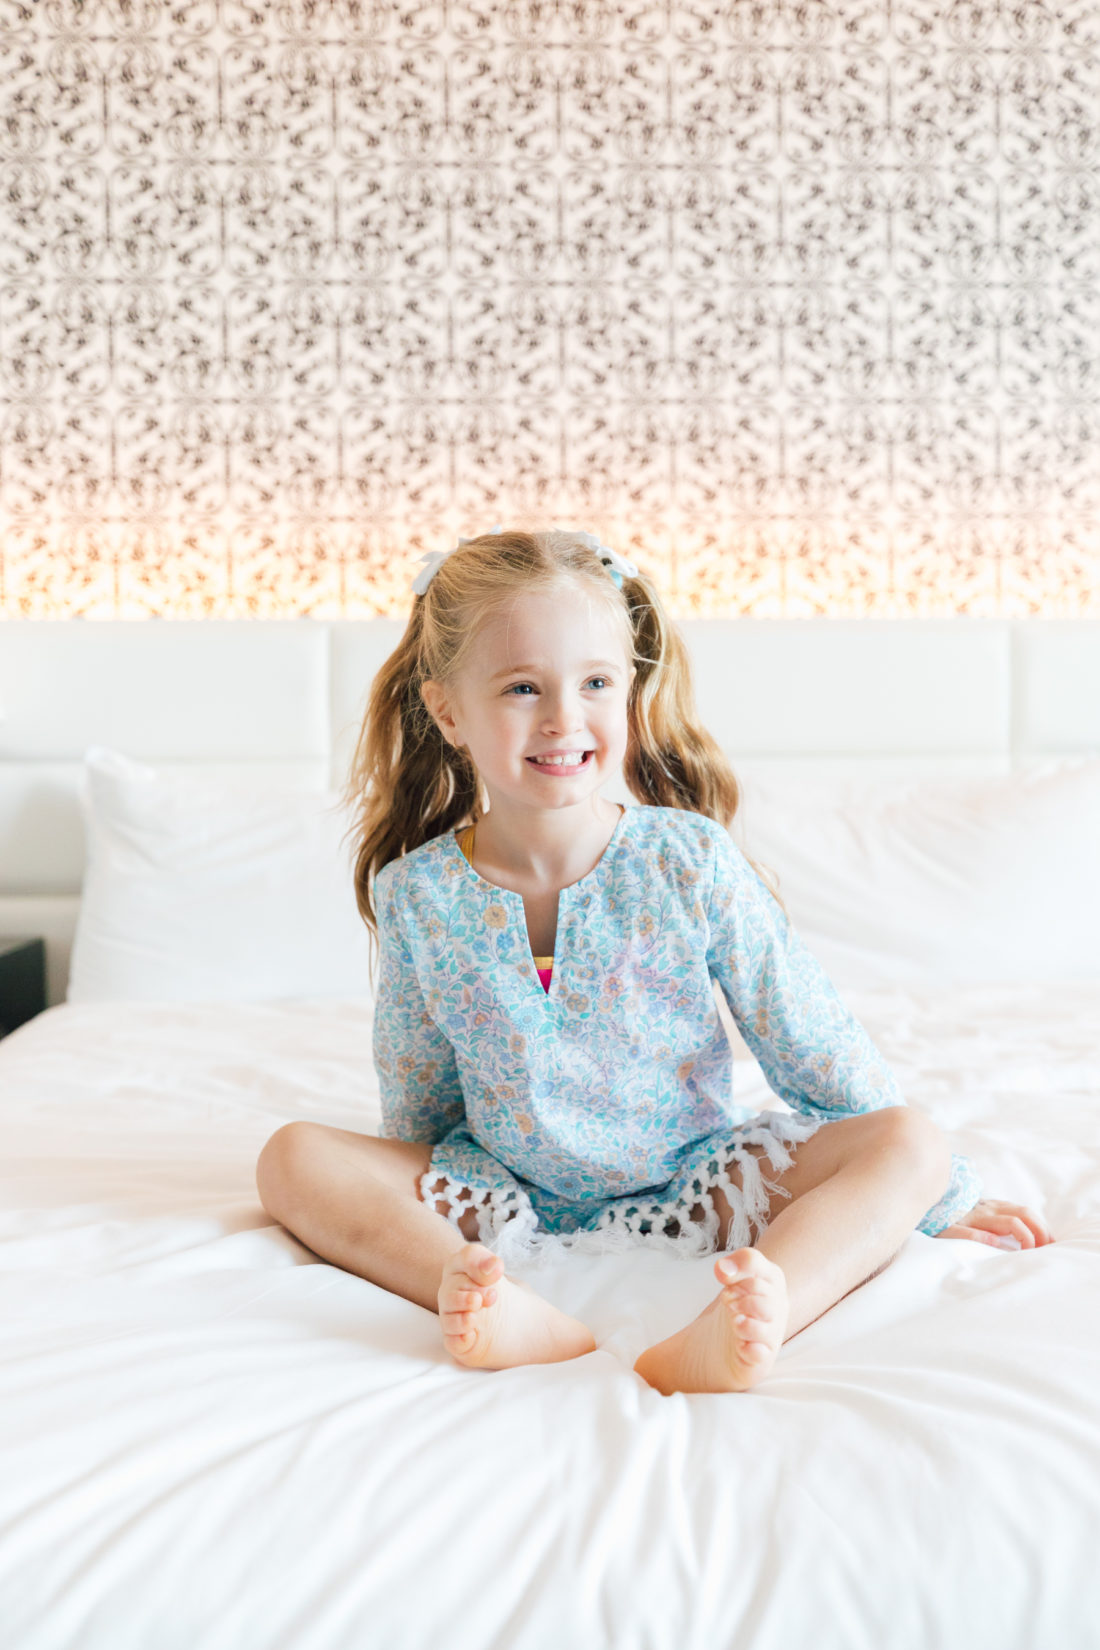 Marlowe Martino poses in her blue floral fringe tunic from the Happily Eva After x Masala Baby collection in a hotel room in Miami